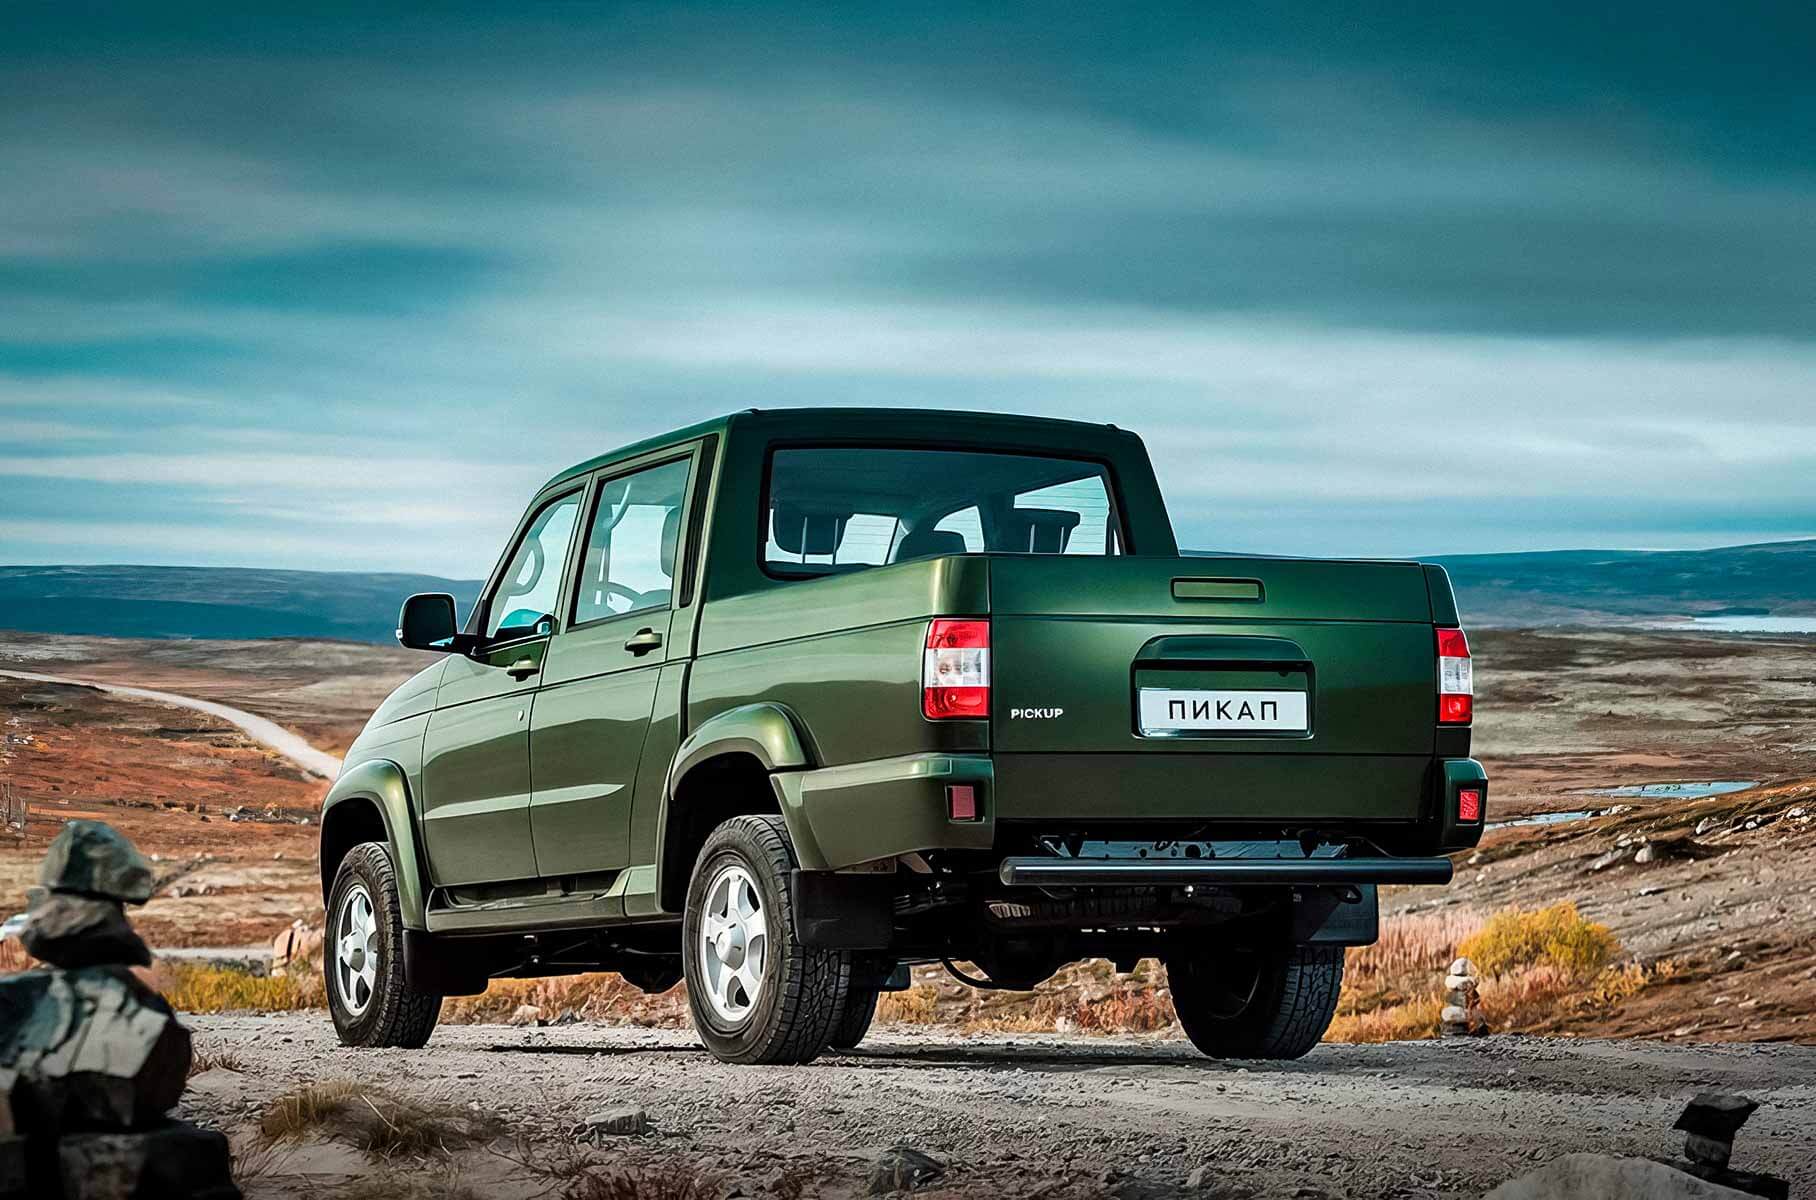 UAZ production will be established in Chechnya